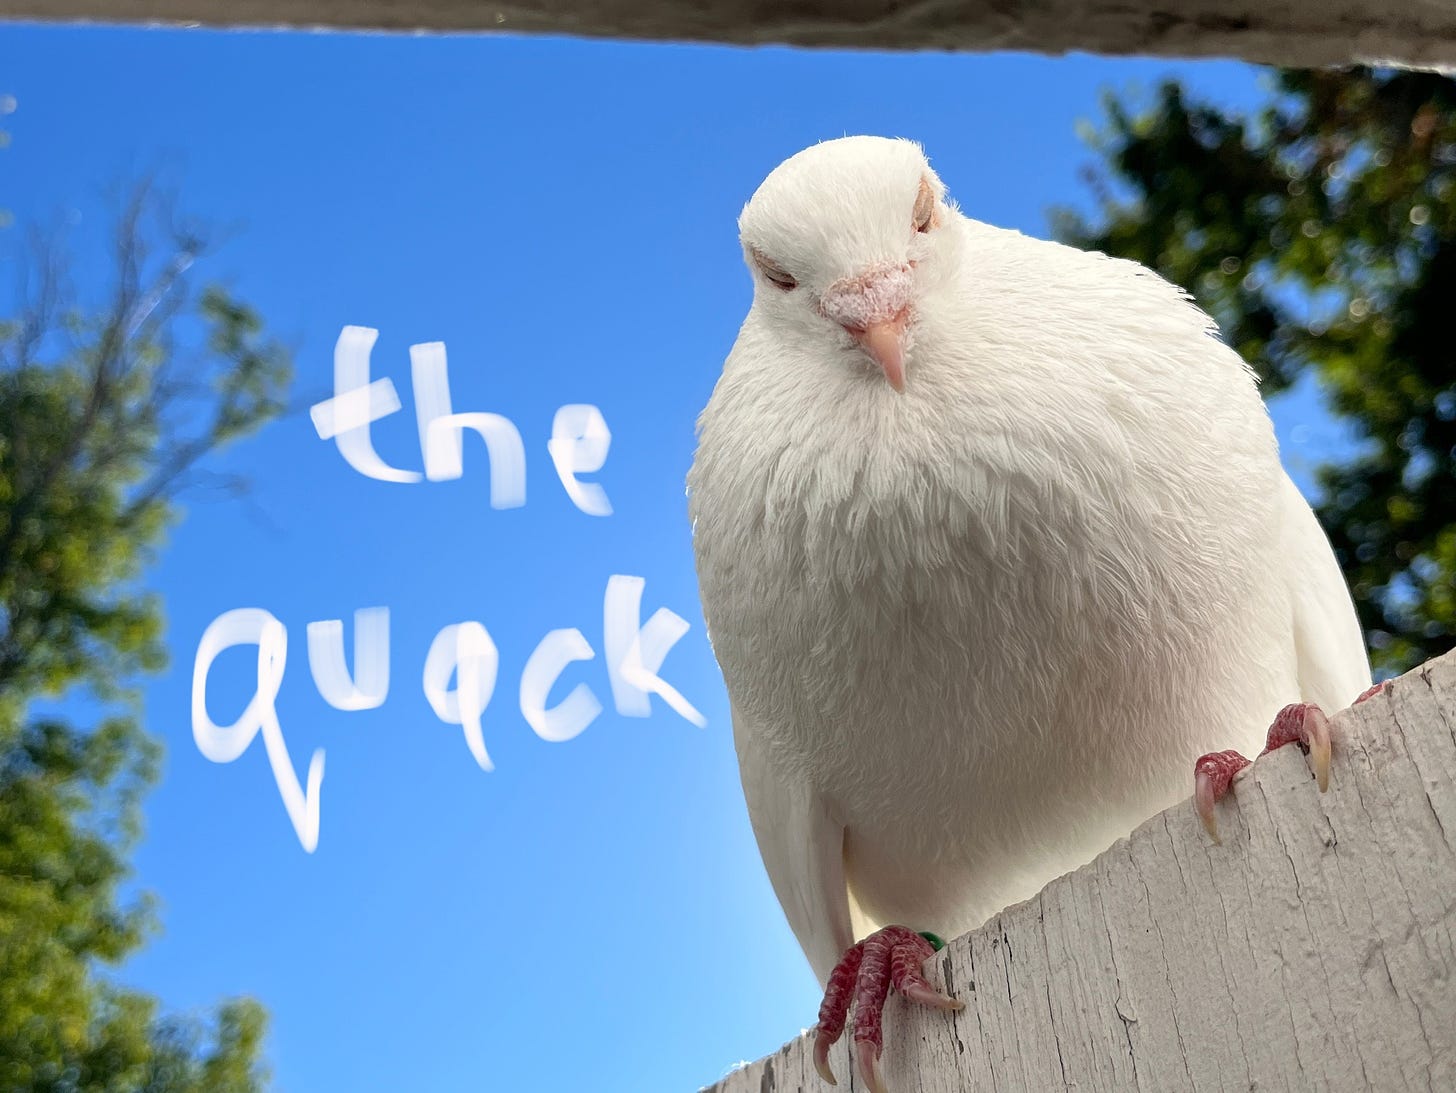 A white pigeon glares down from above. the words "the quack" are written against a blue sky